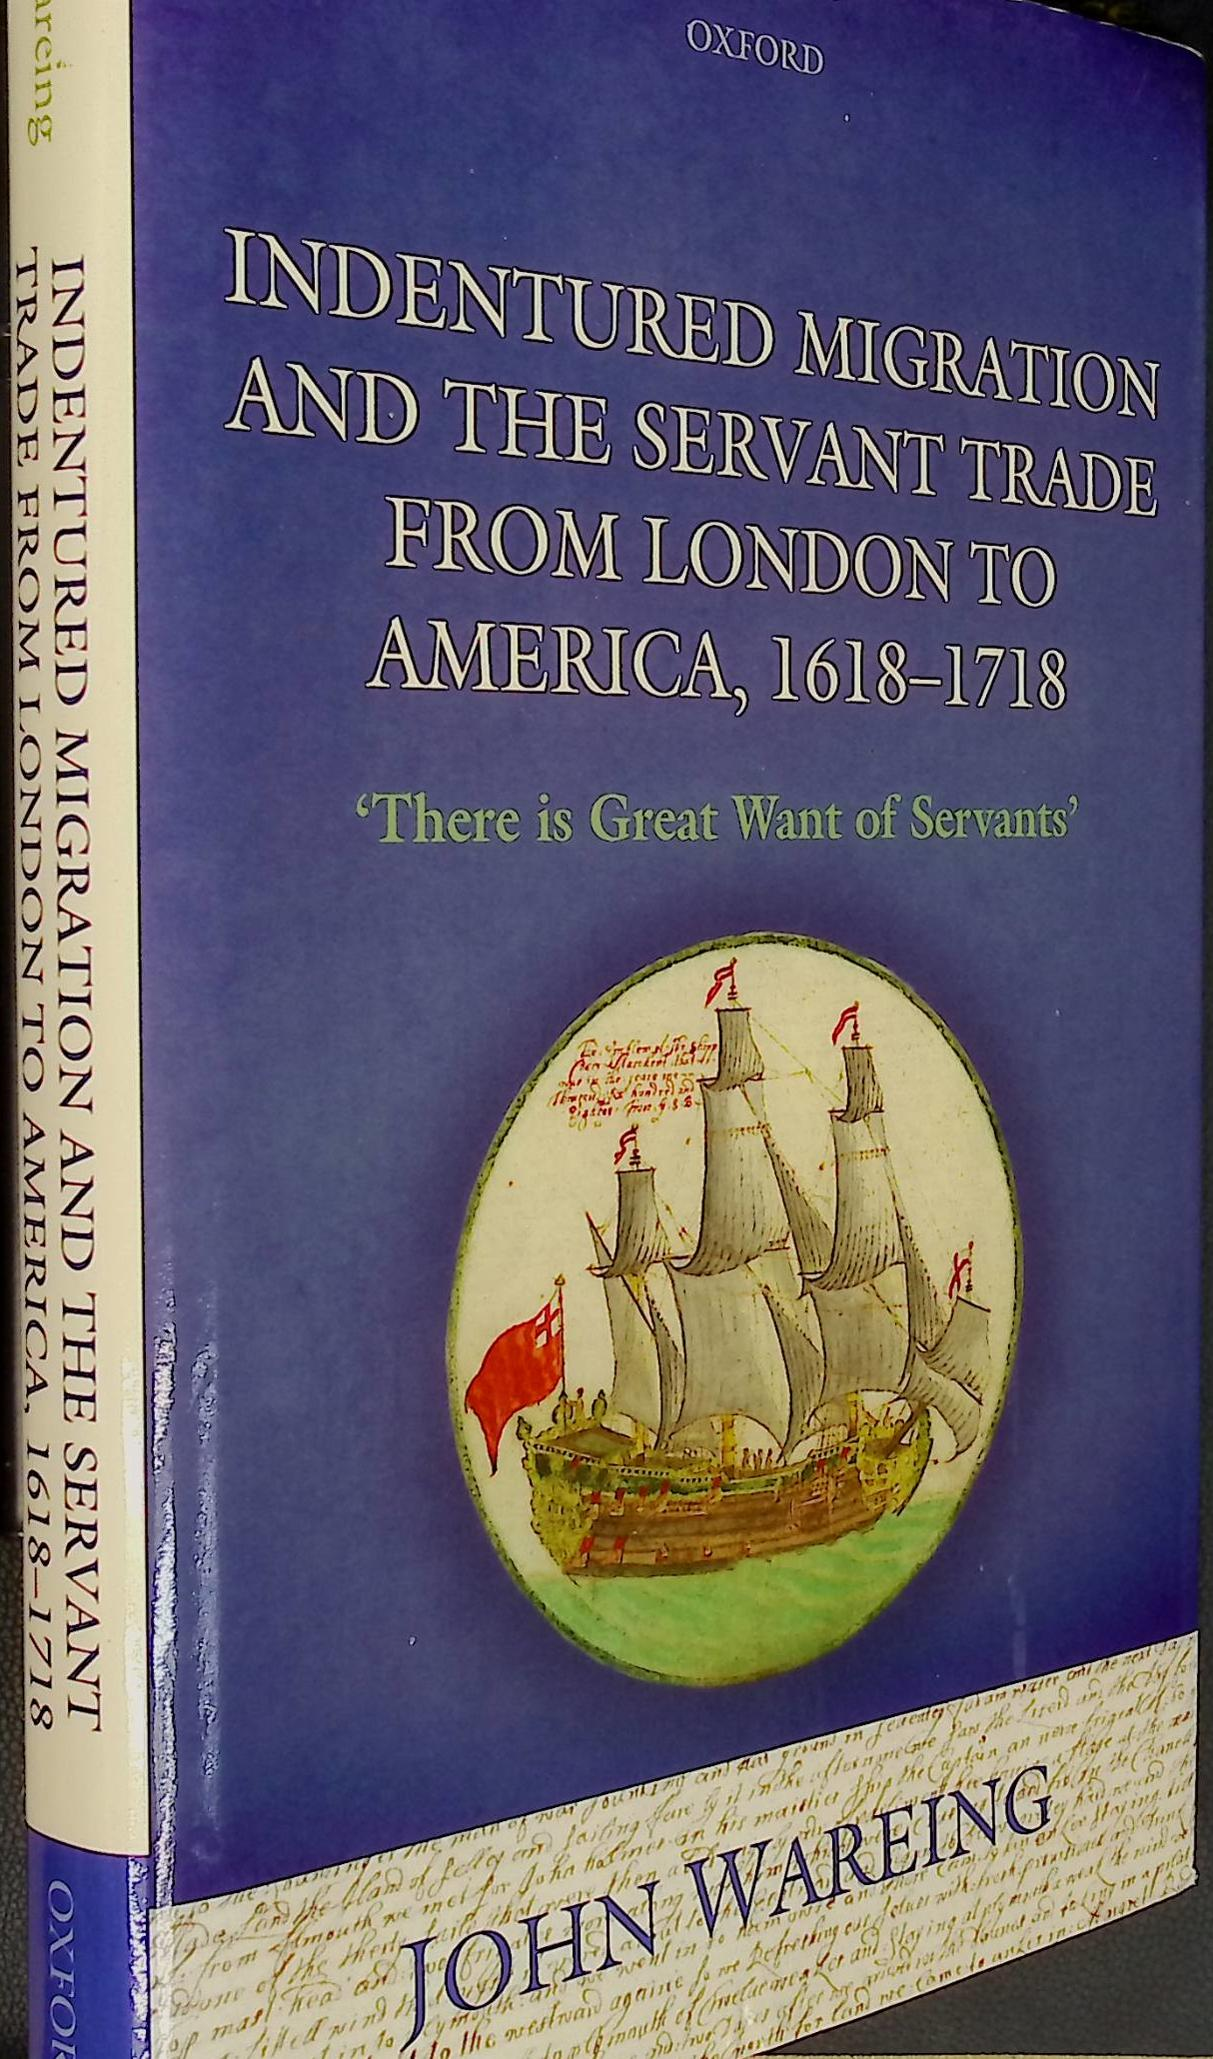 Indentured Migration and the Servant Trade from London to America 1618-1718. 'There is Great Want of Servants'